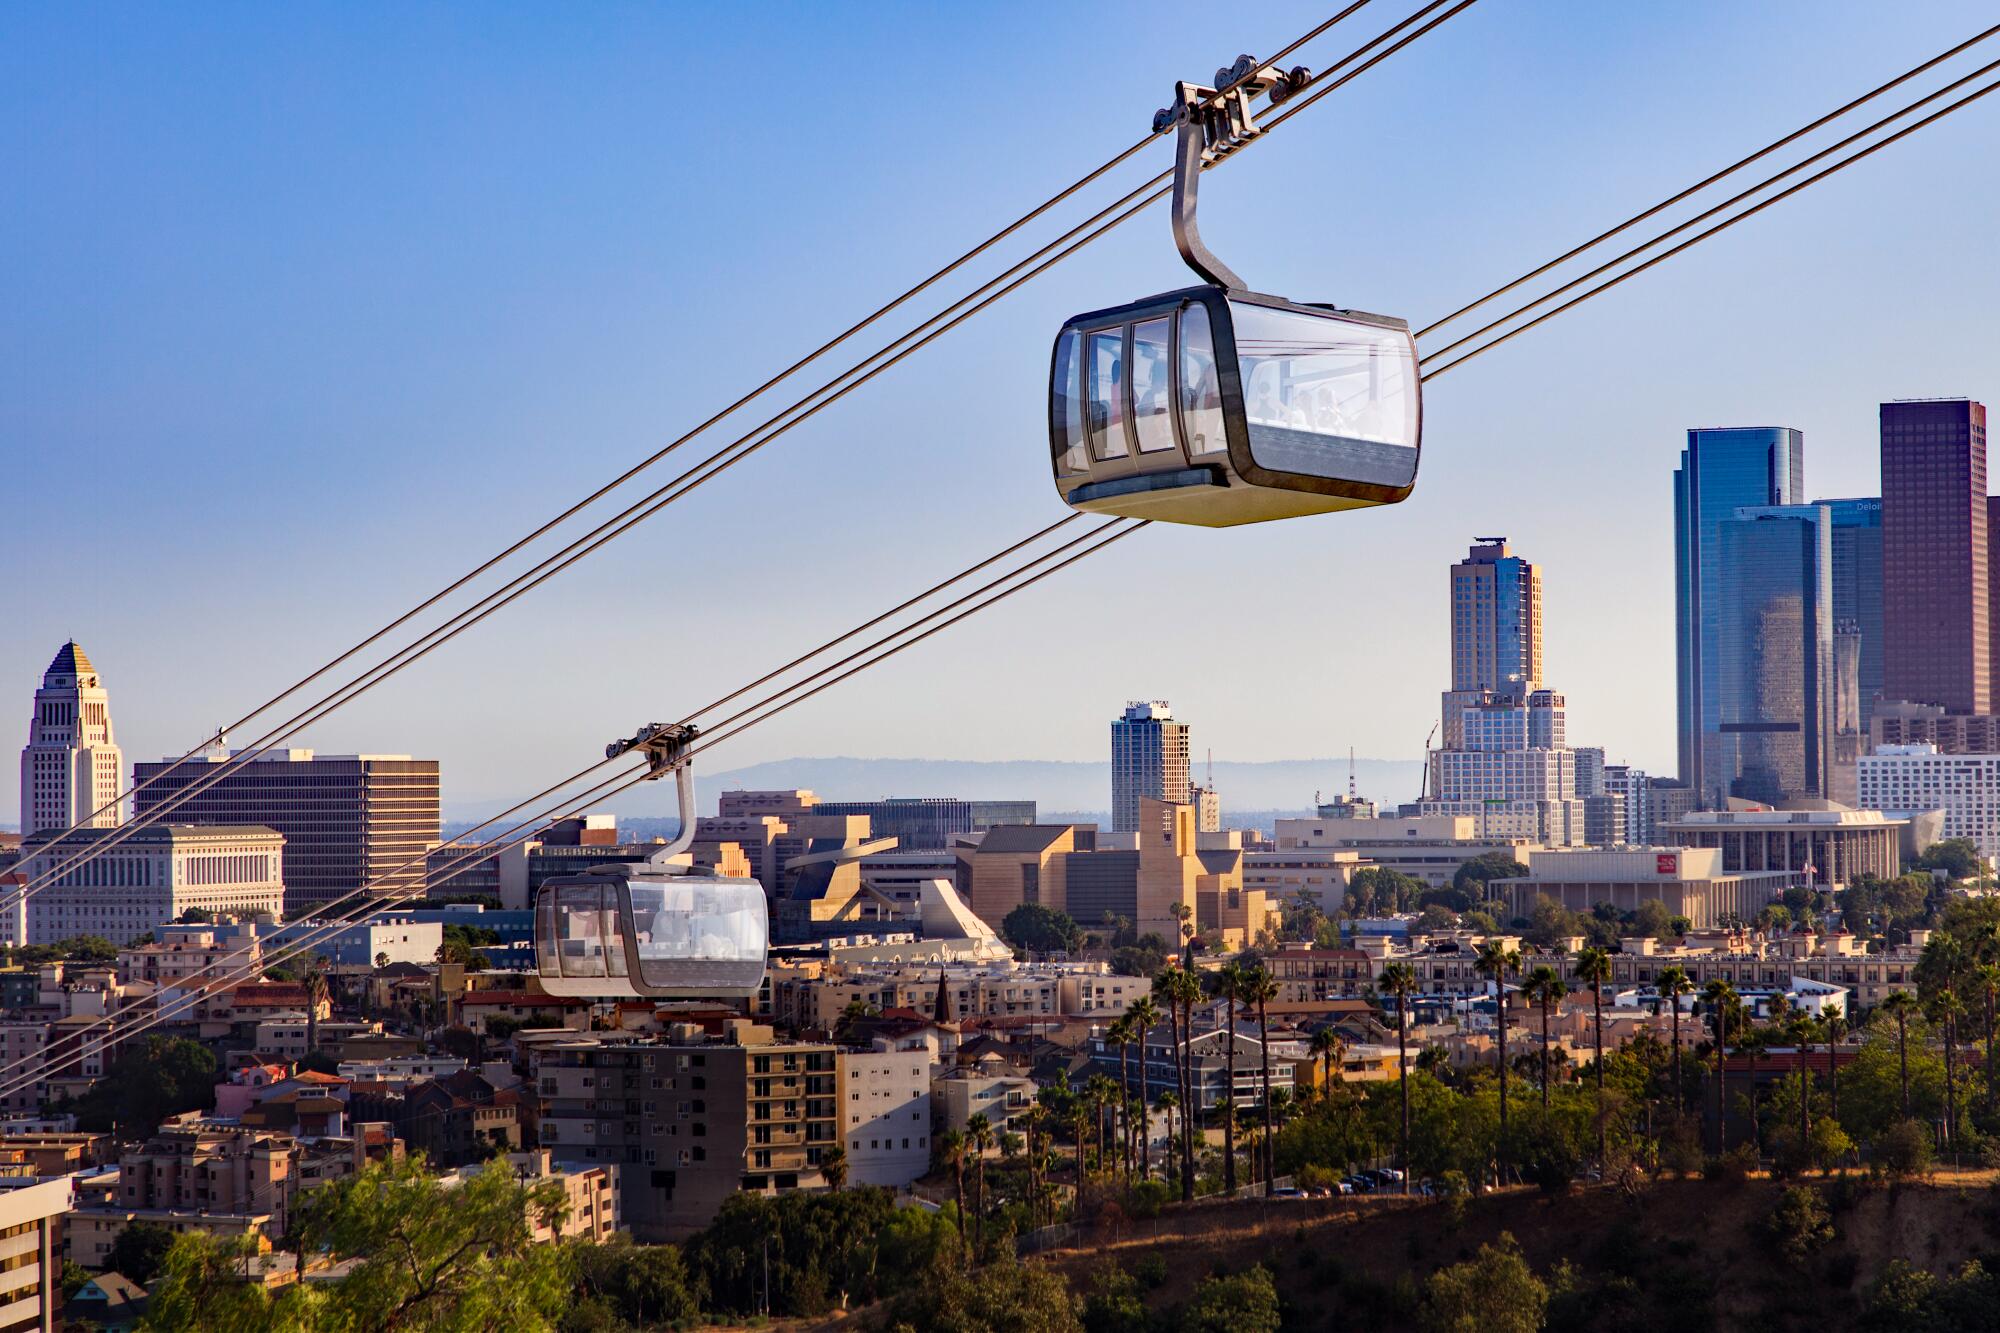 A rendering on a gondola cabin travelling on a cable with the skyline of downtown Los Angeles in the background.